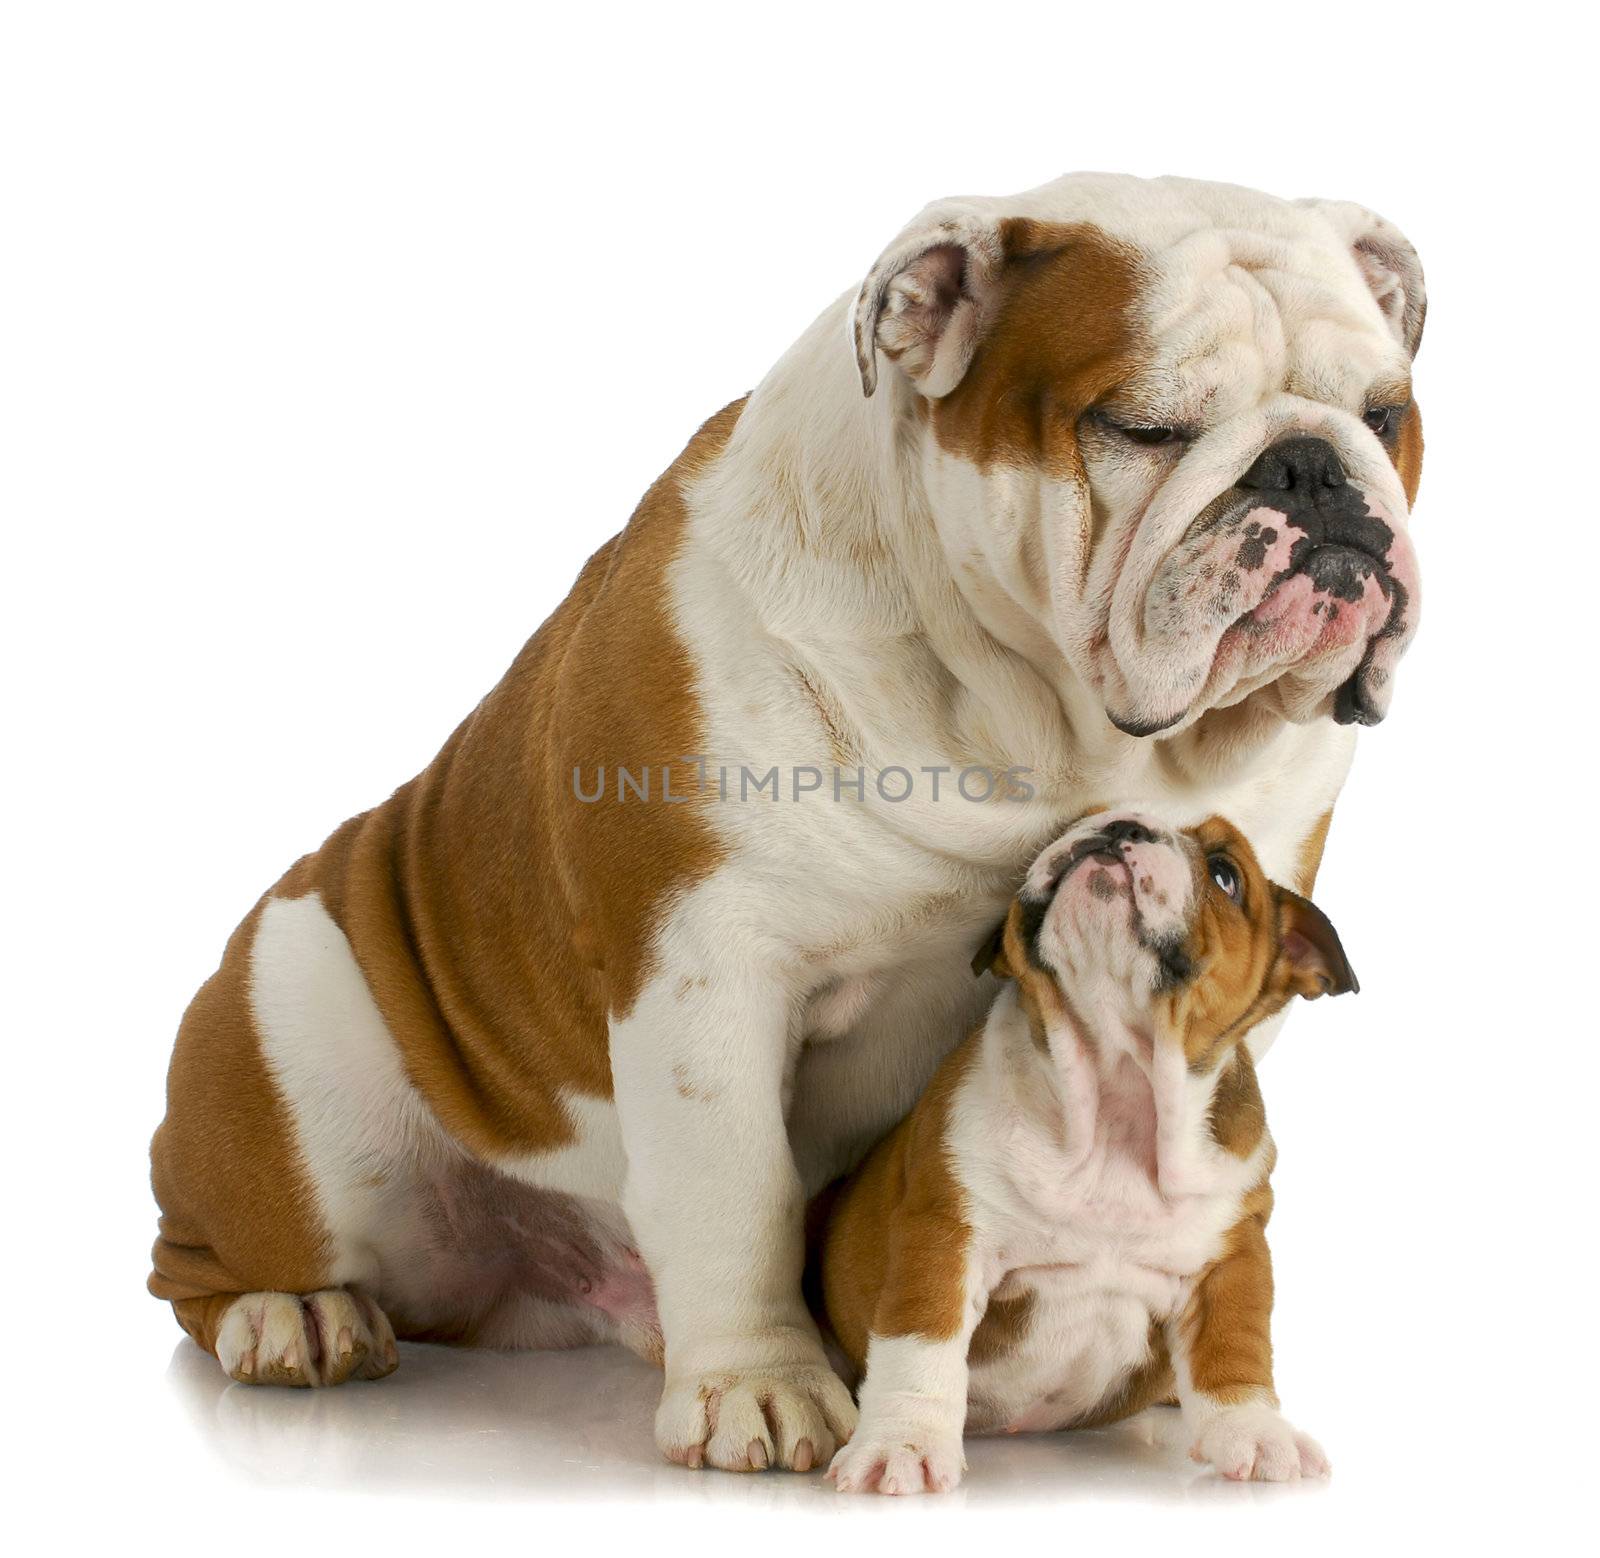 big and small dog - english bulldog father sitting with 8 week old puppy on white background